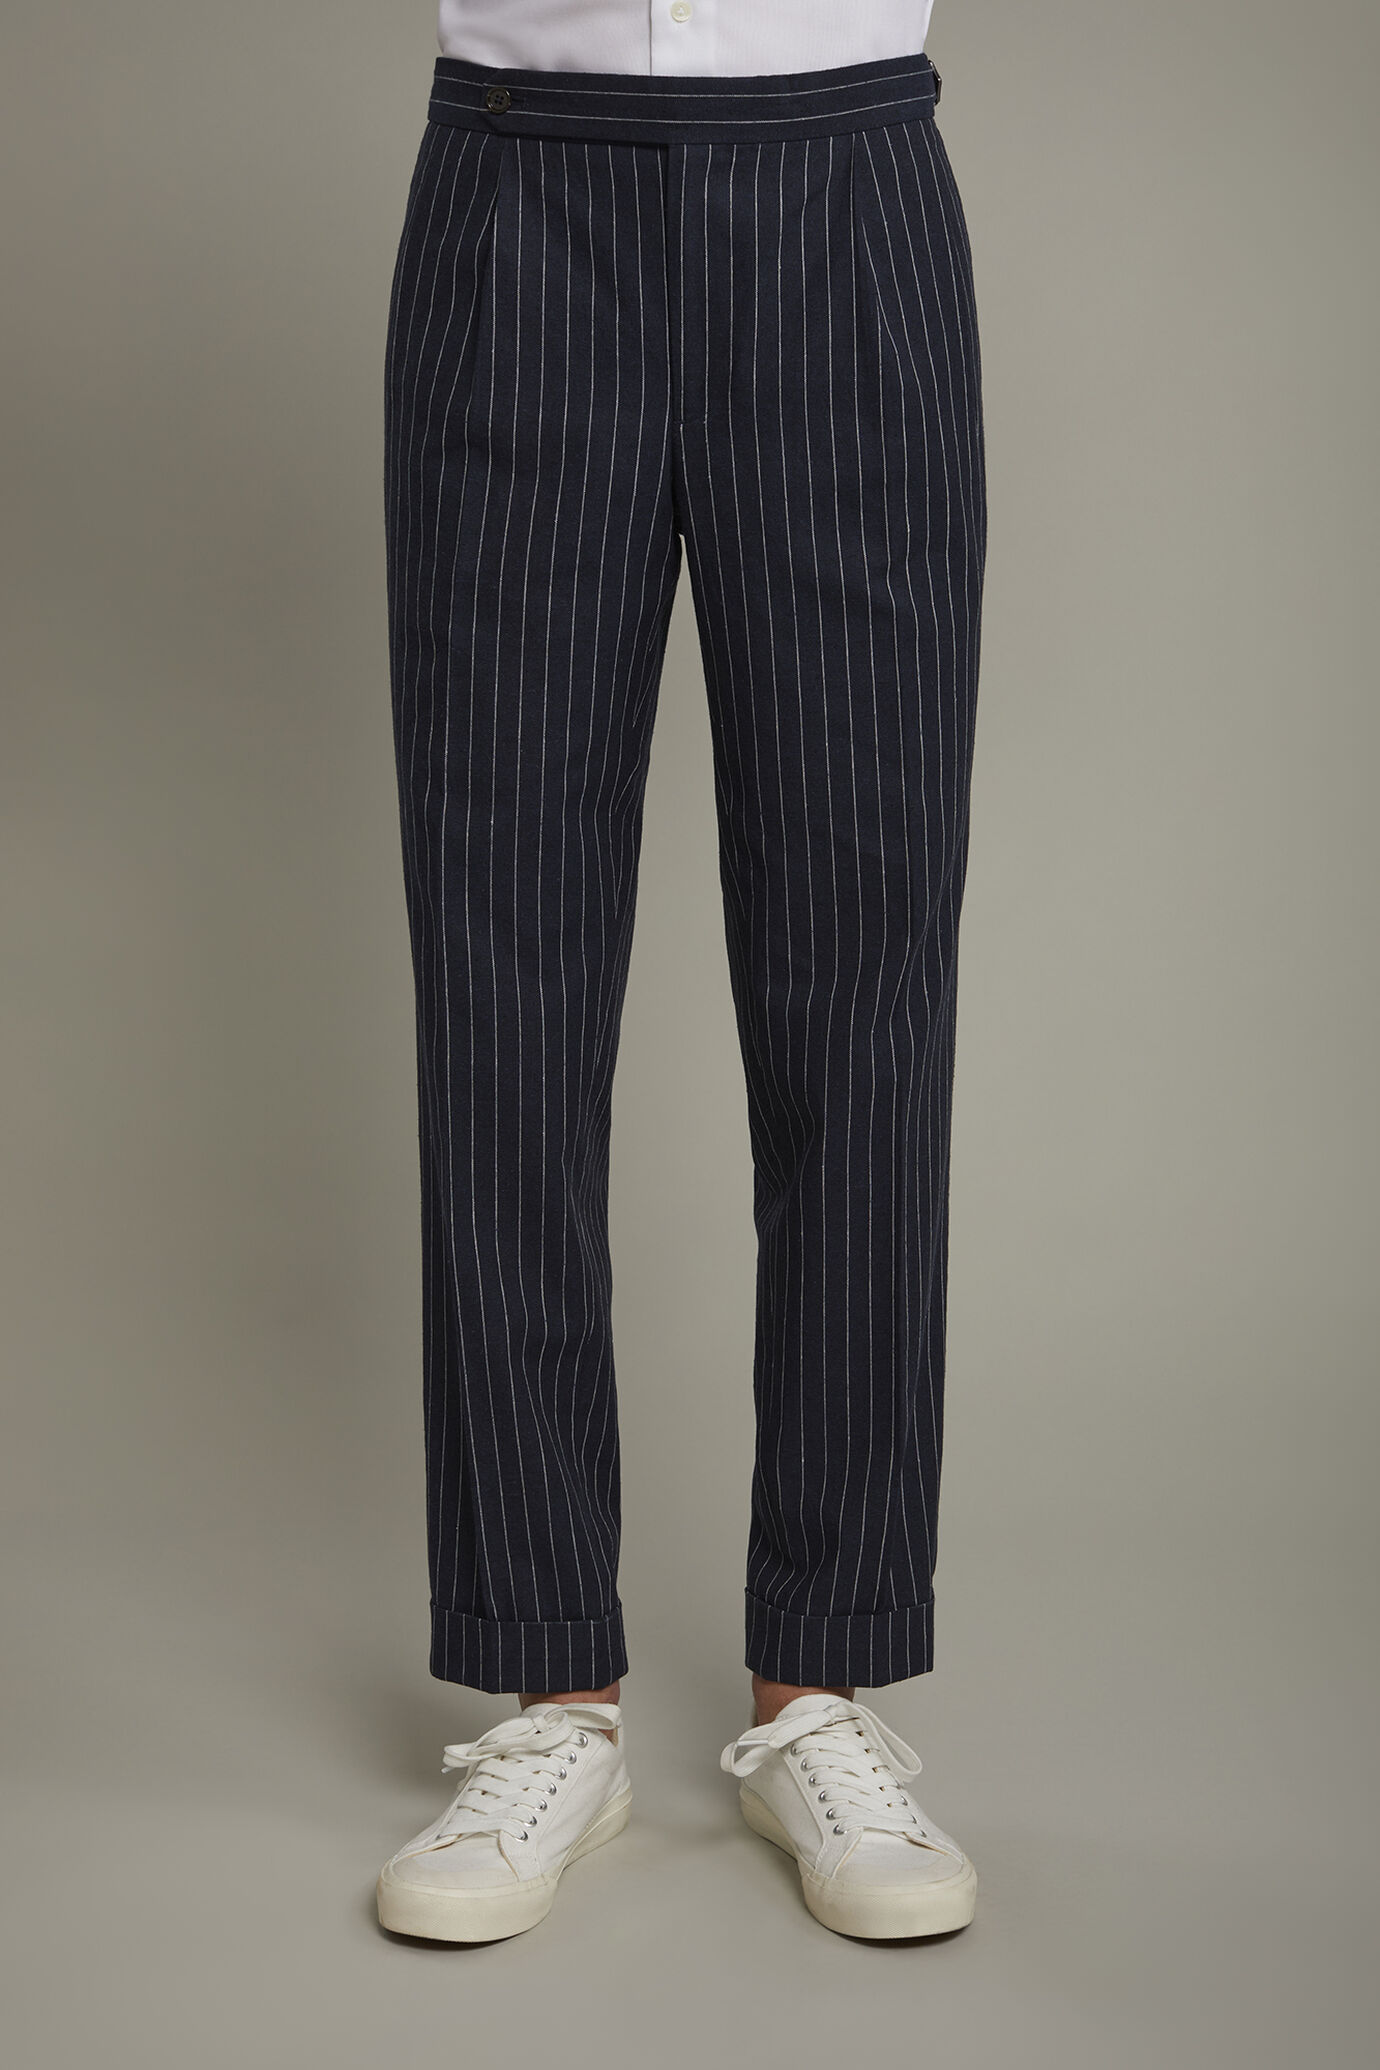 Men's classic double pinces trousers linen and cotton fabric with regular fit pinstripe design image number 3